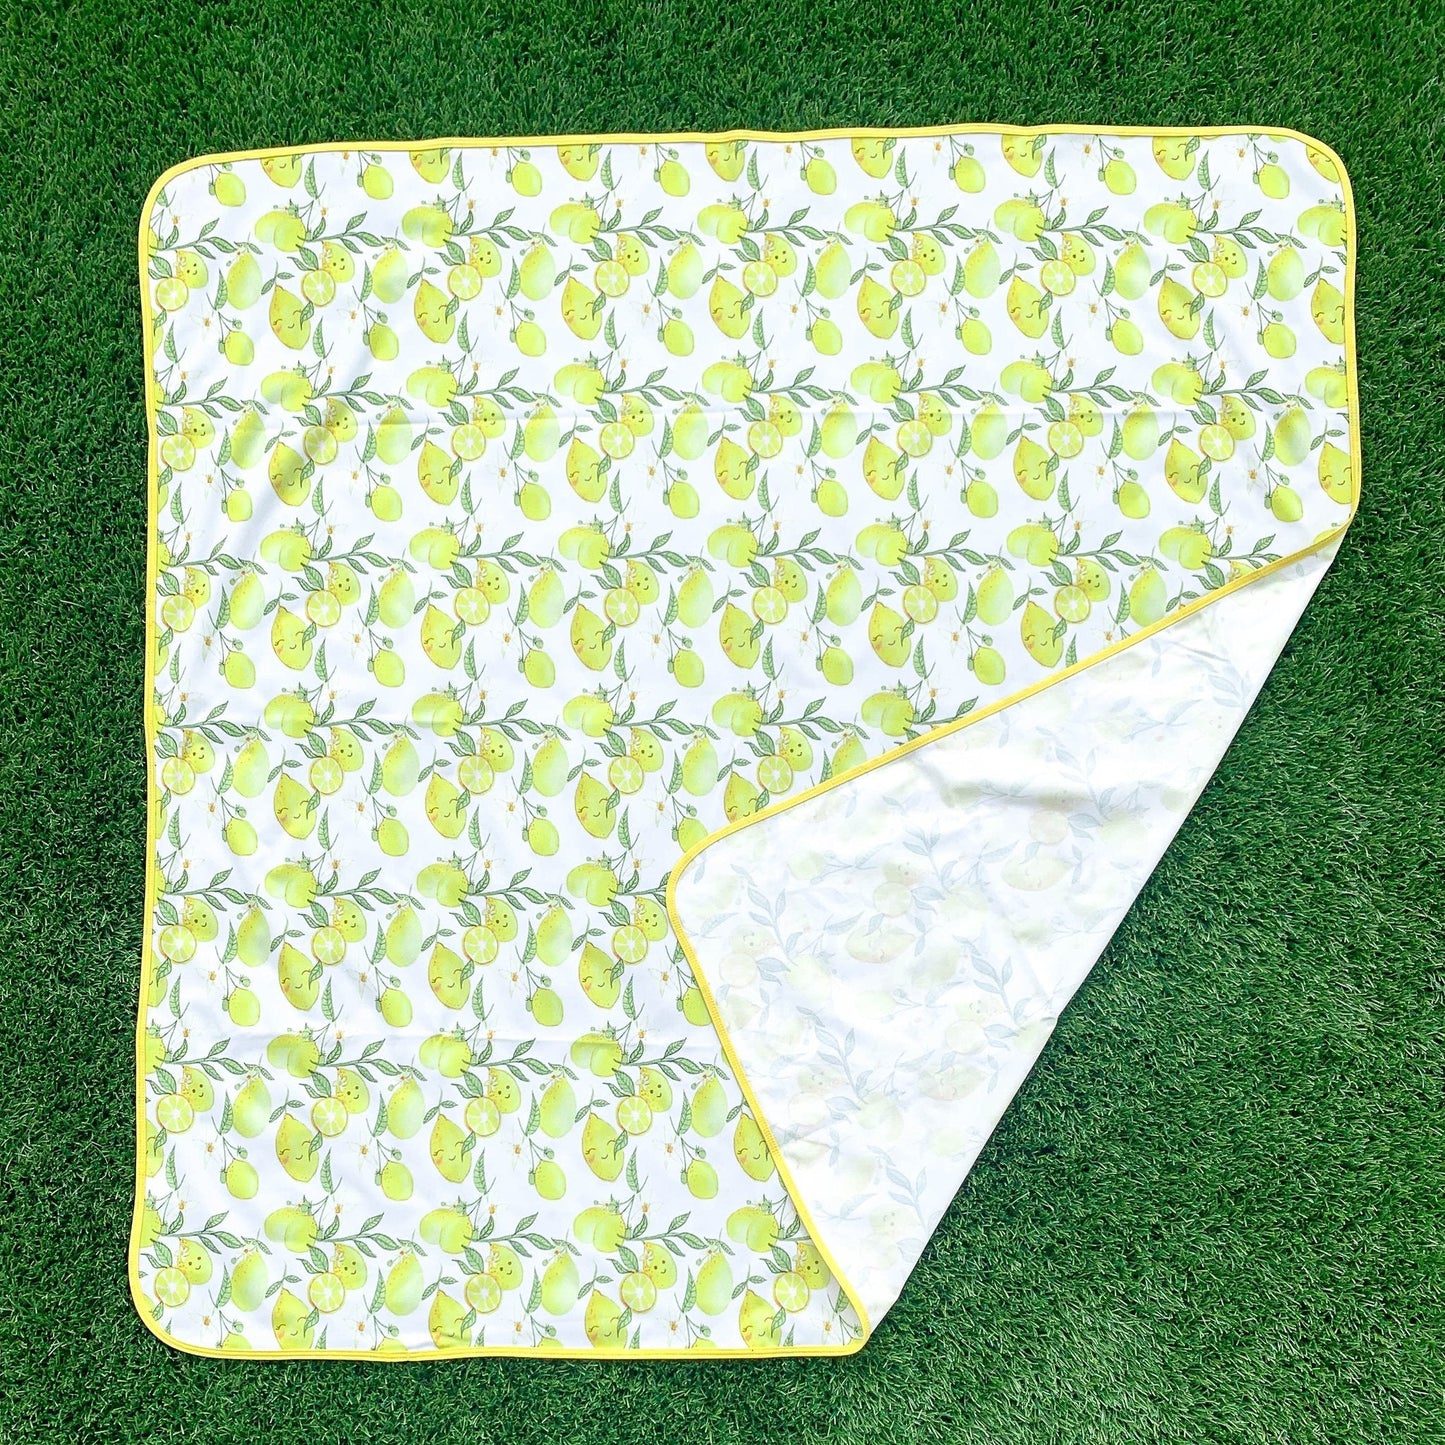 Fresh Squeezed Lemon Splash Mat - A Waterproof Catch-All for Highchair Spills and More! - WERONE